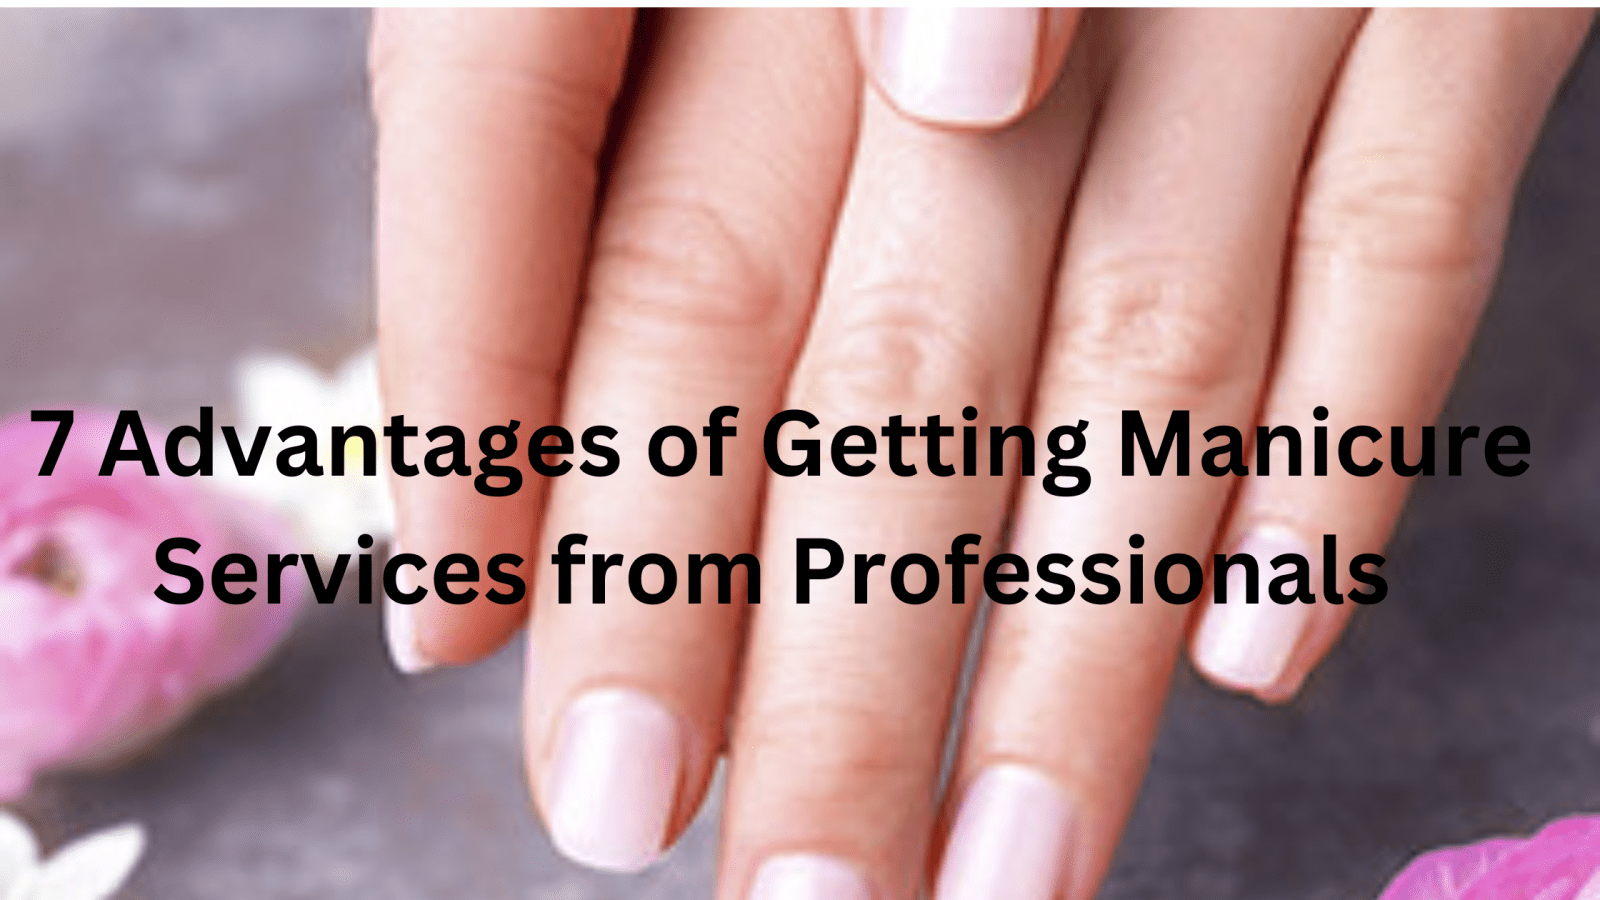 7 Advantages of Getting Manicure Services from Professionals